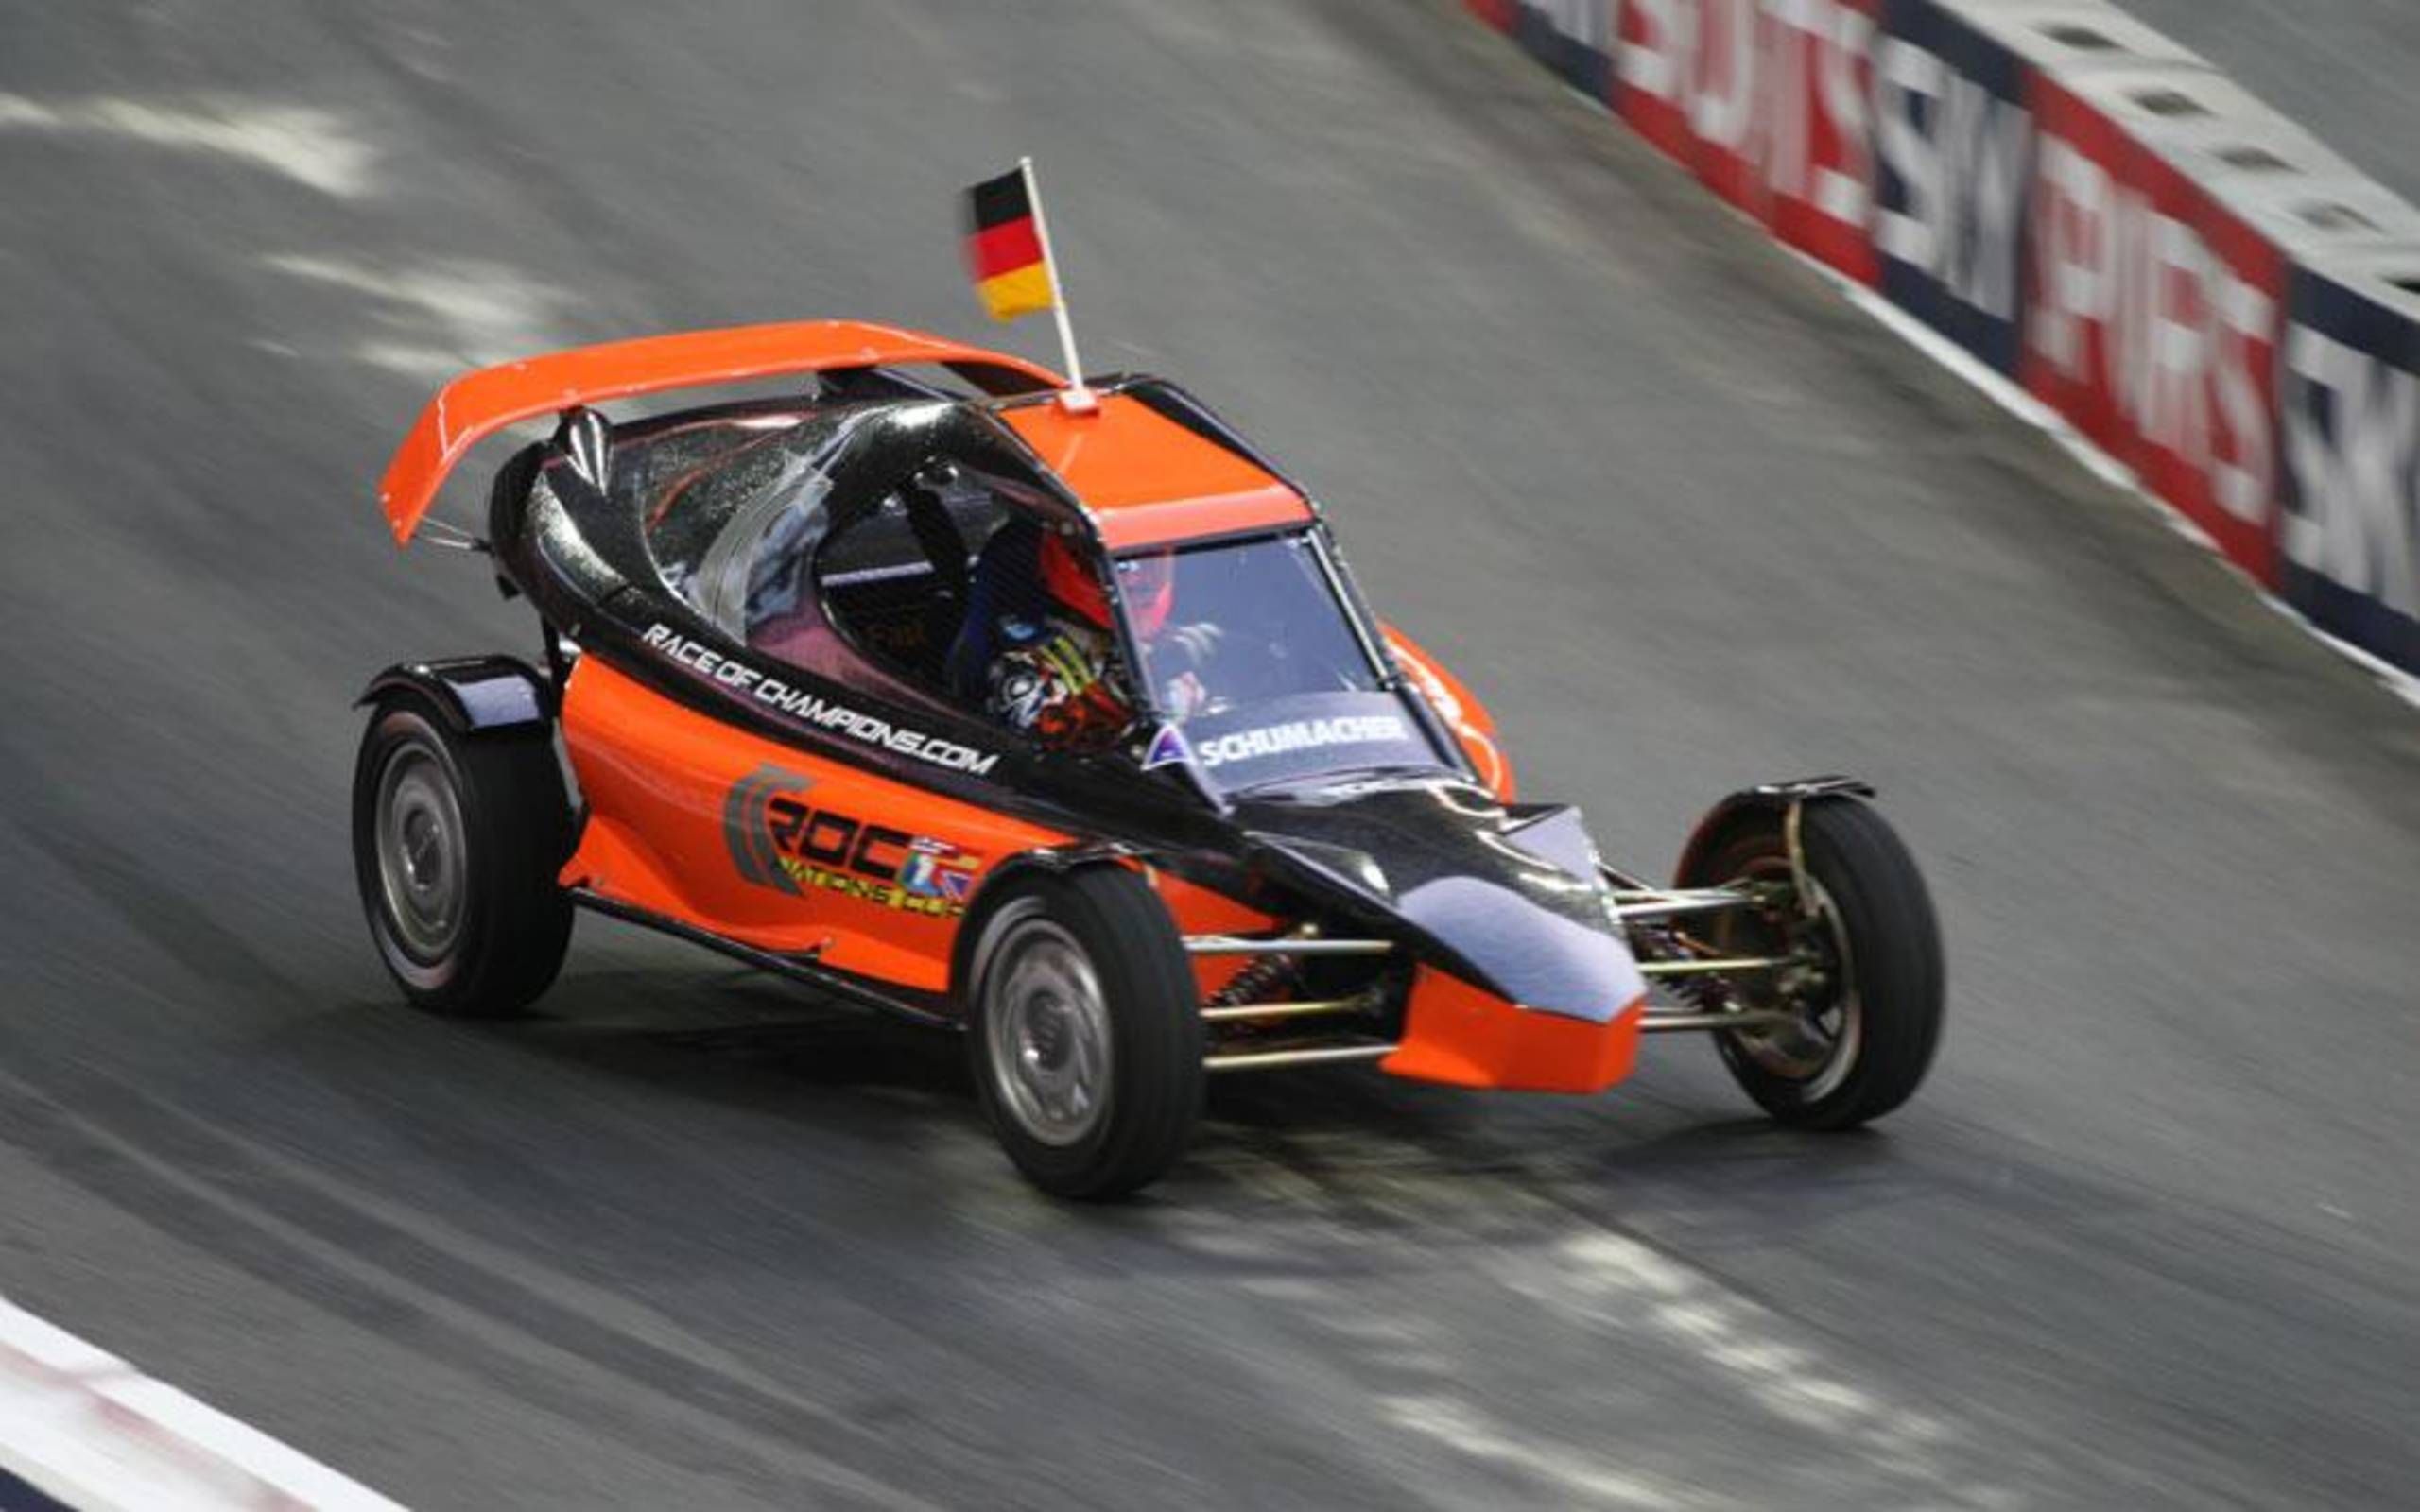 solopgang Stejl hoppe Race like a champion with the Race of Champions smartphone app